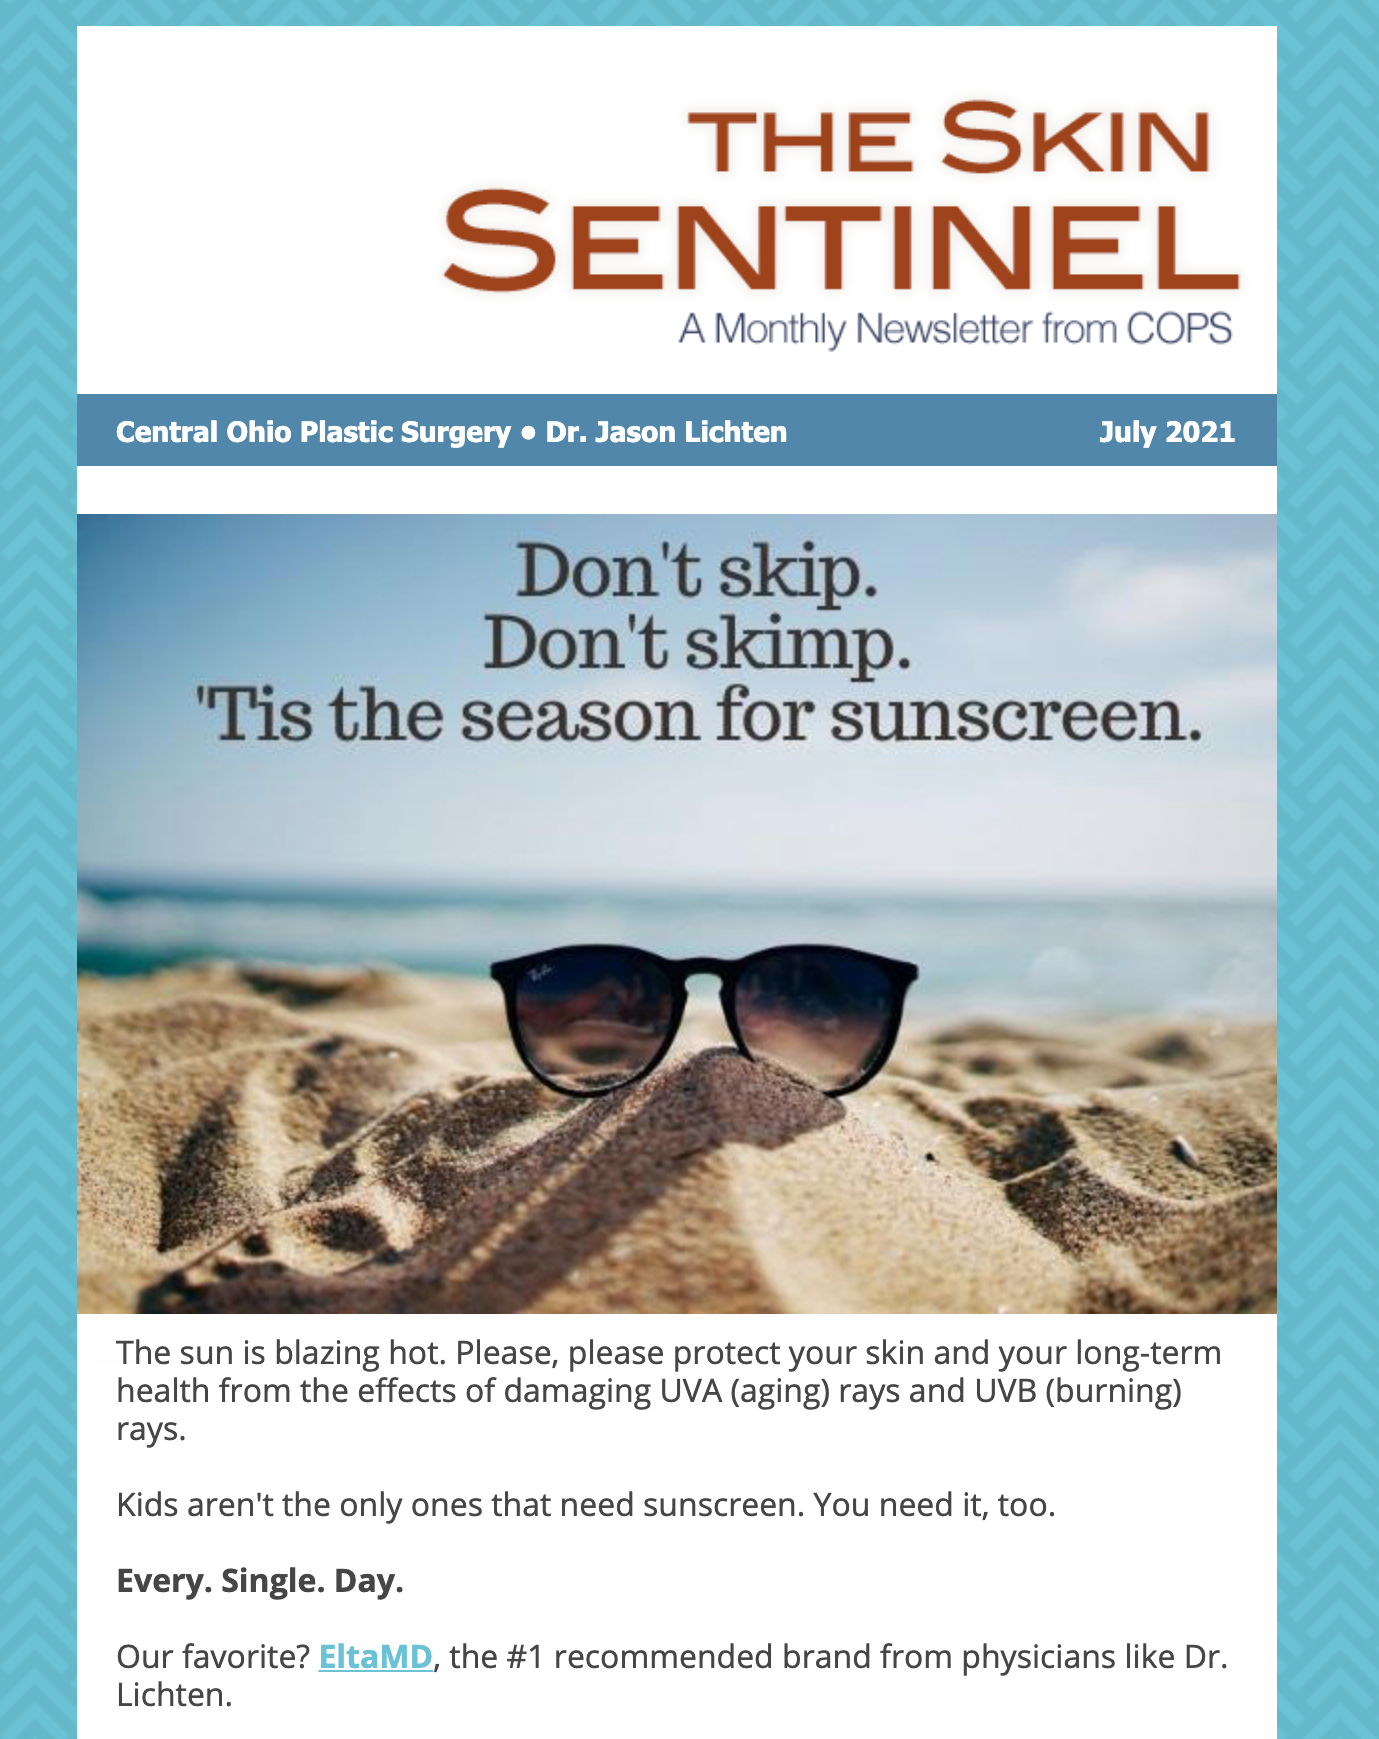 The Skin Sentinel Monthly Newsletter - July 2021